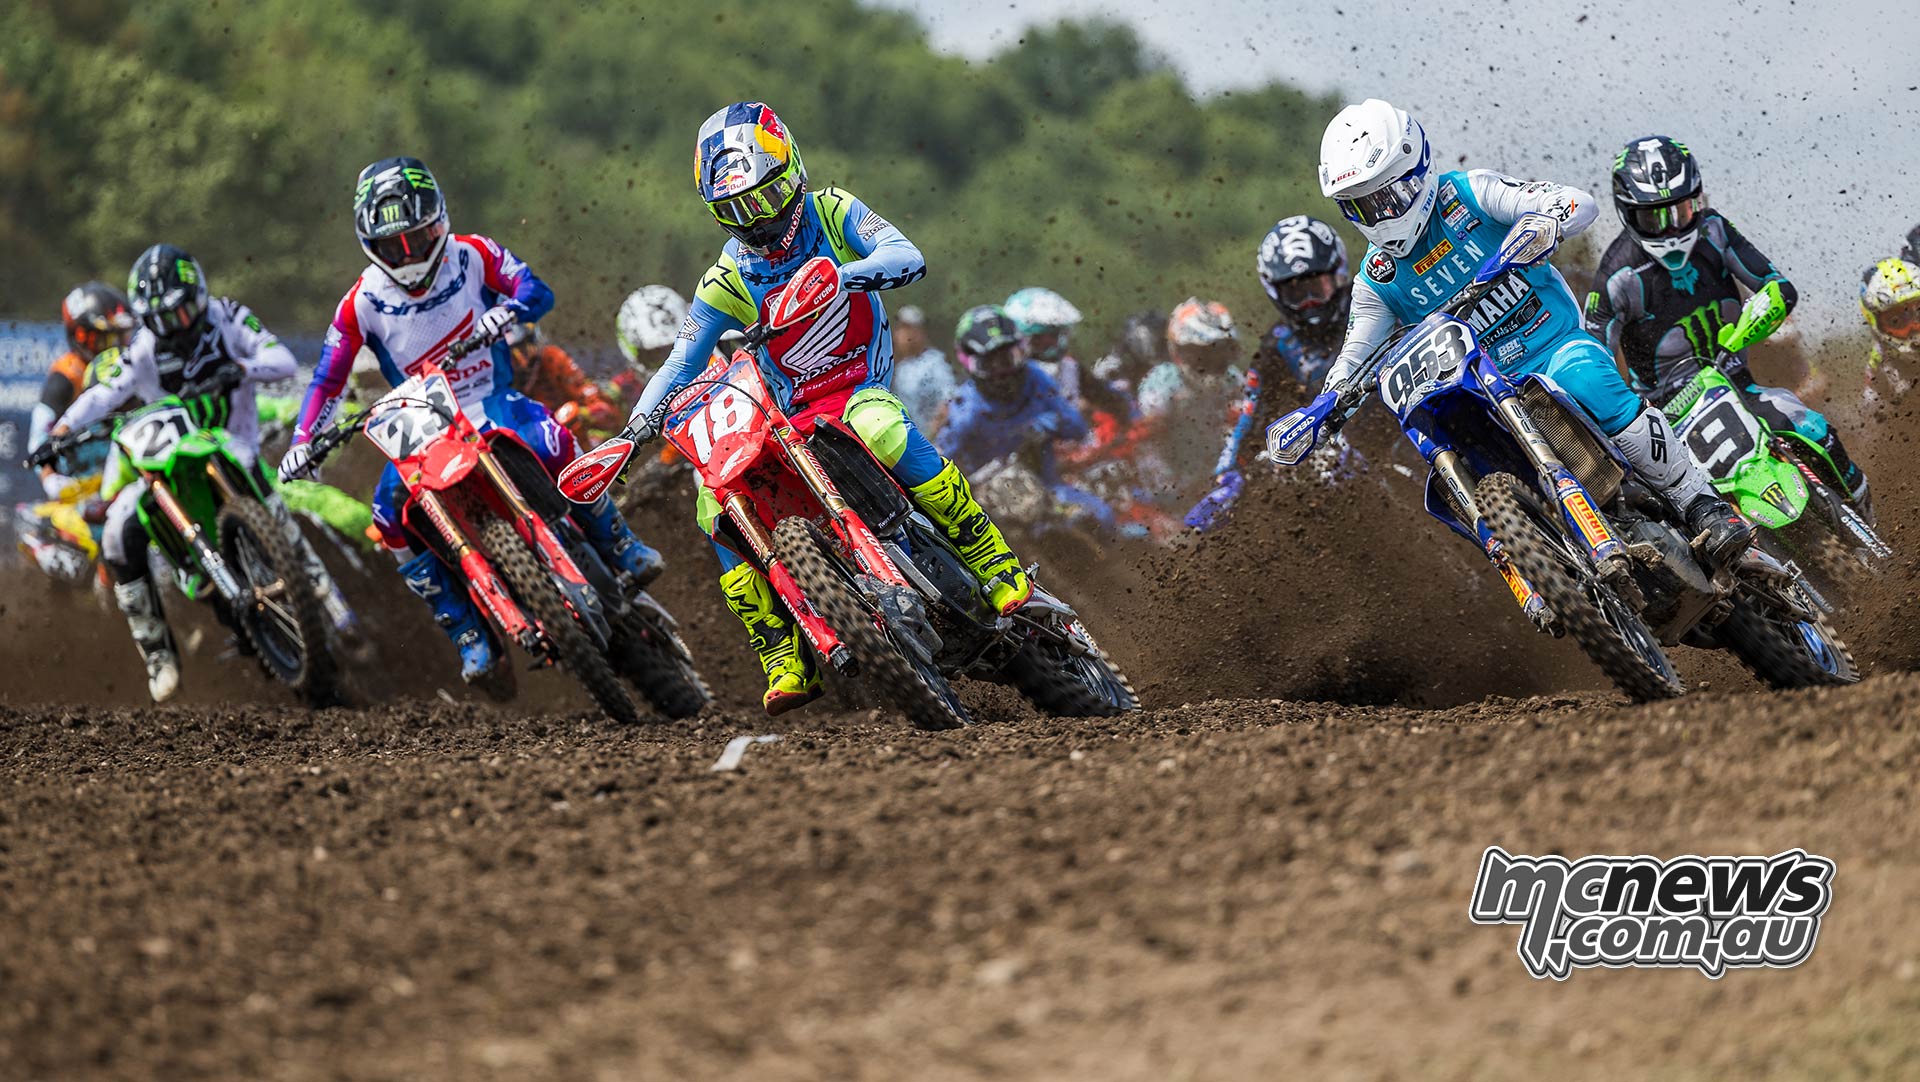 First huge batch of images from Unadilla AMA Pro MX